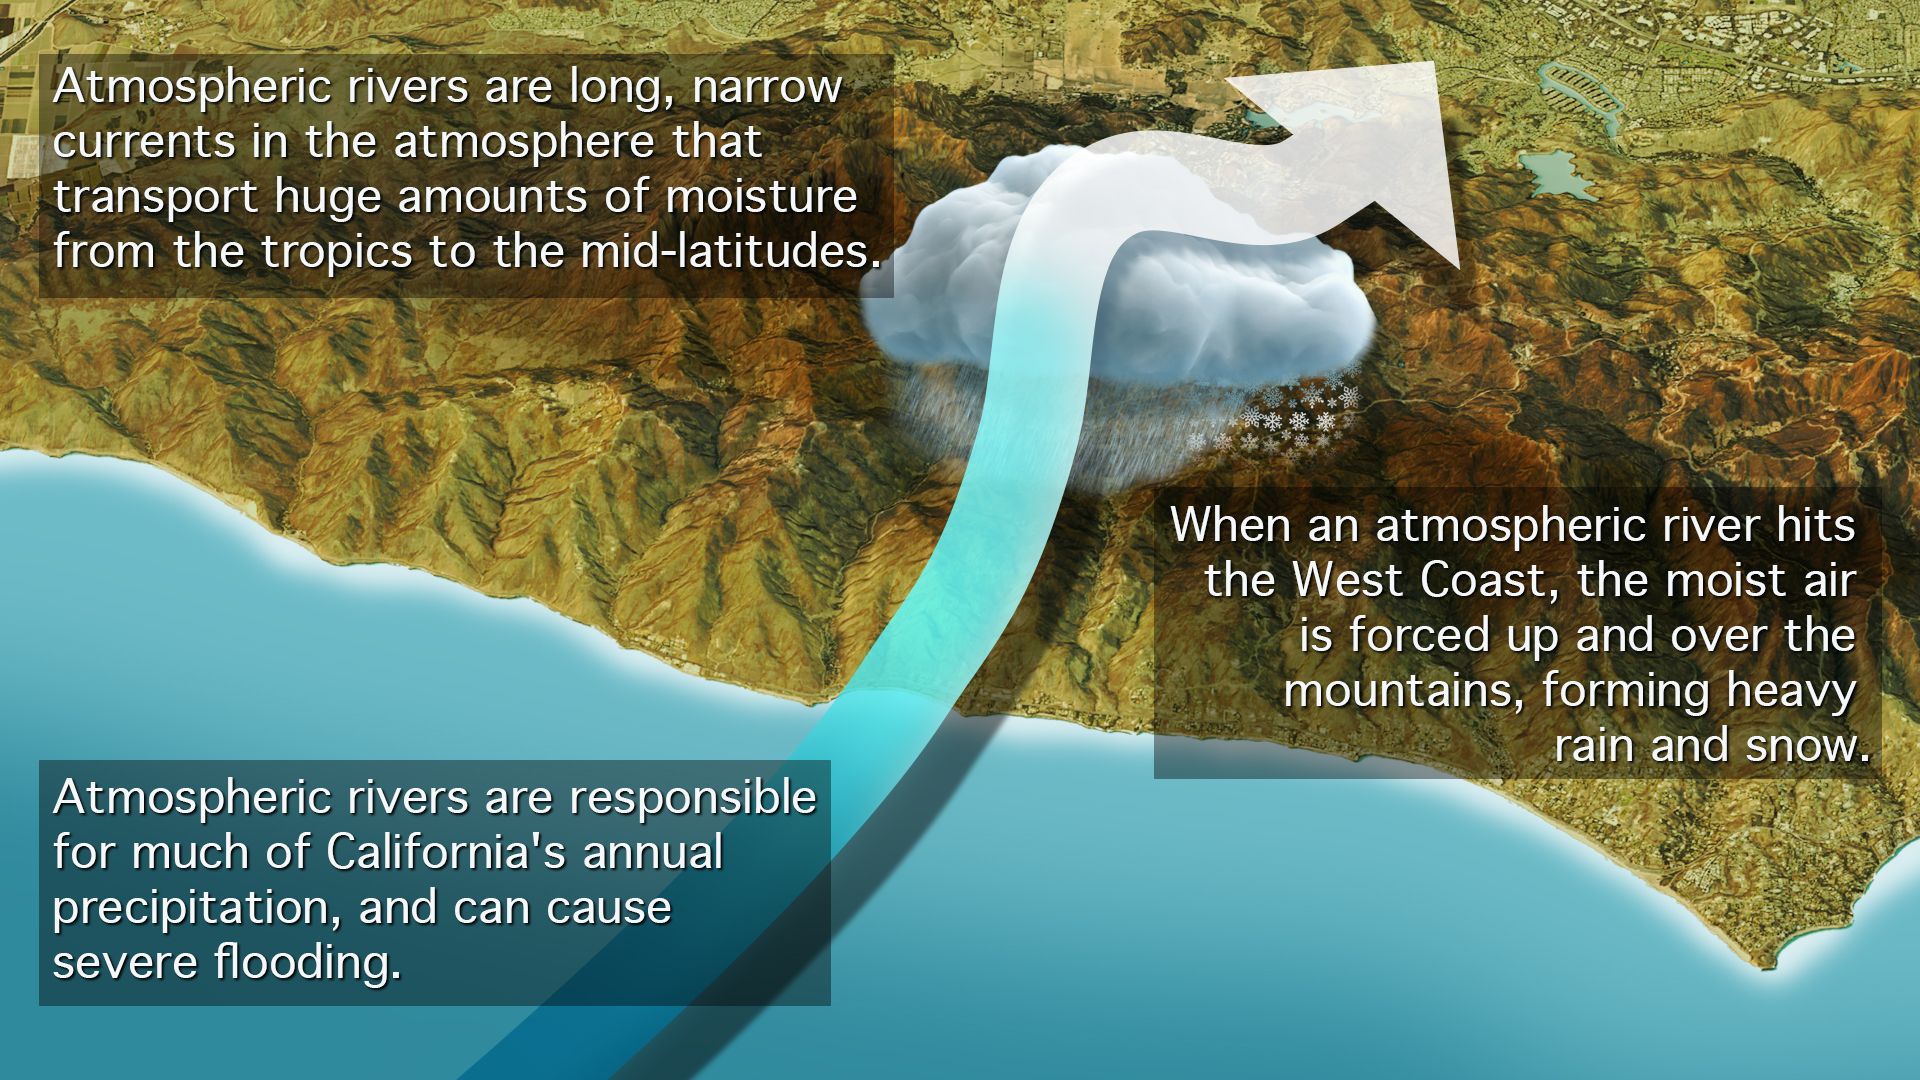 Schematic diagram of what an atmospheric river looks like hitting a coastline.